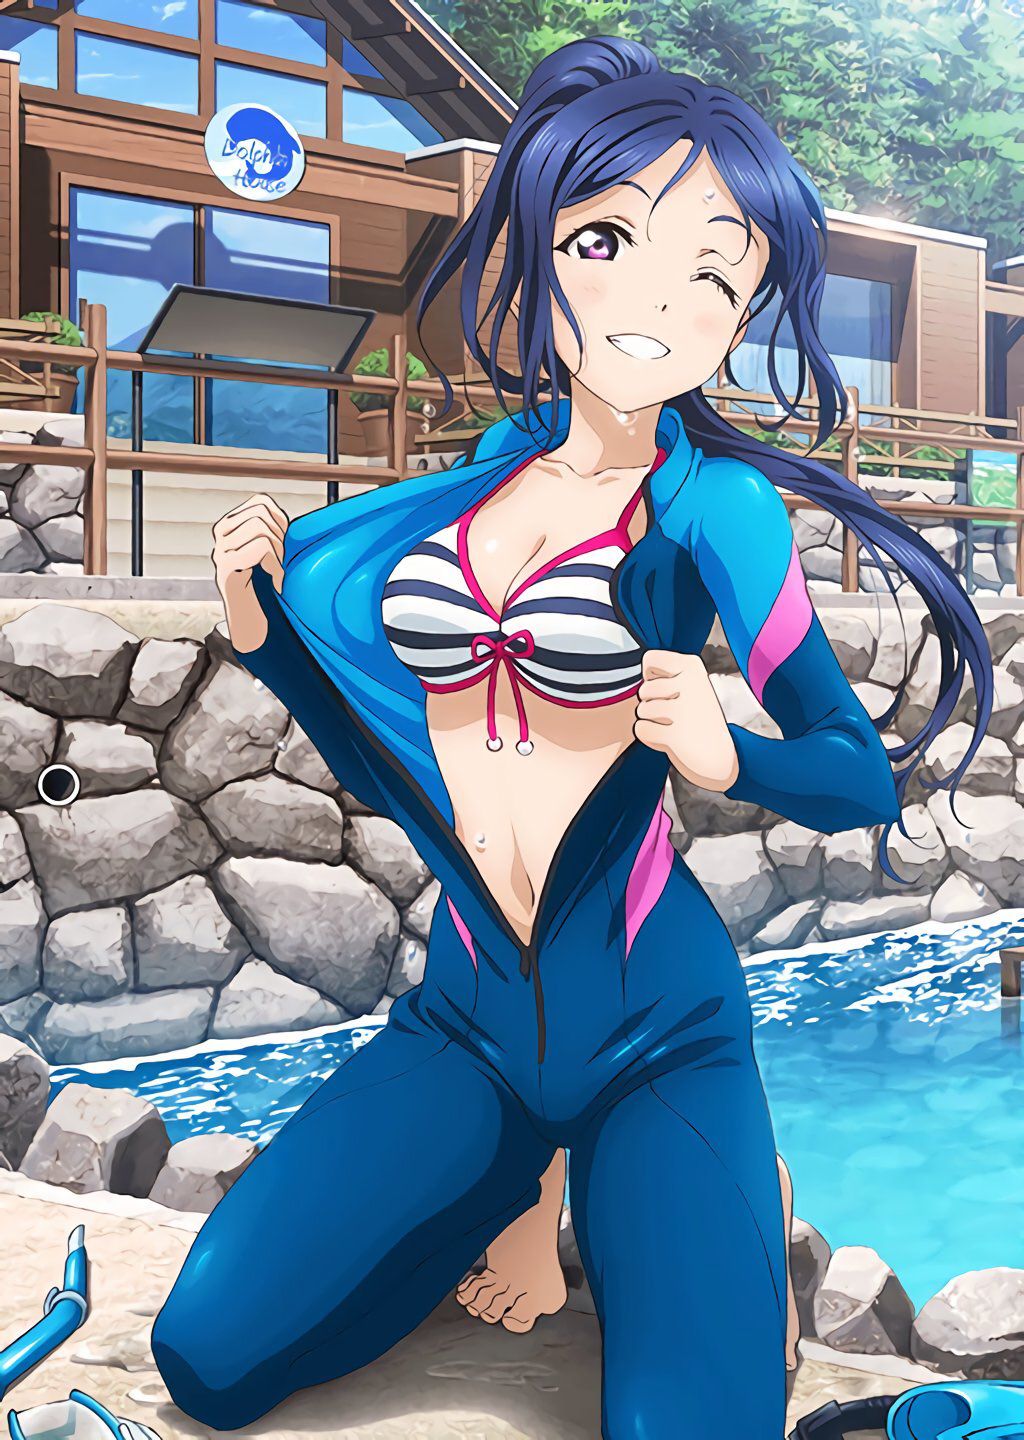 【With images】 The most erotic and syco character in the love live series wwwwwww 11